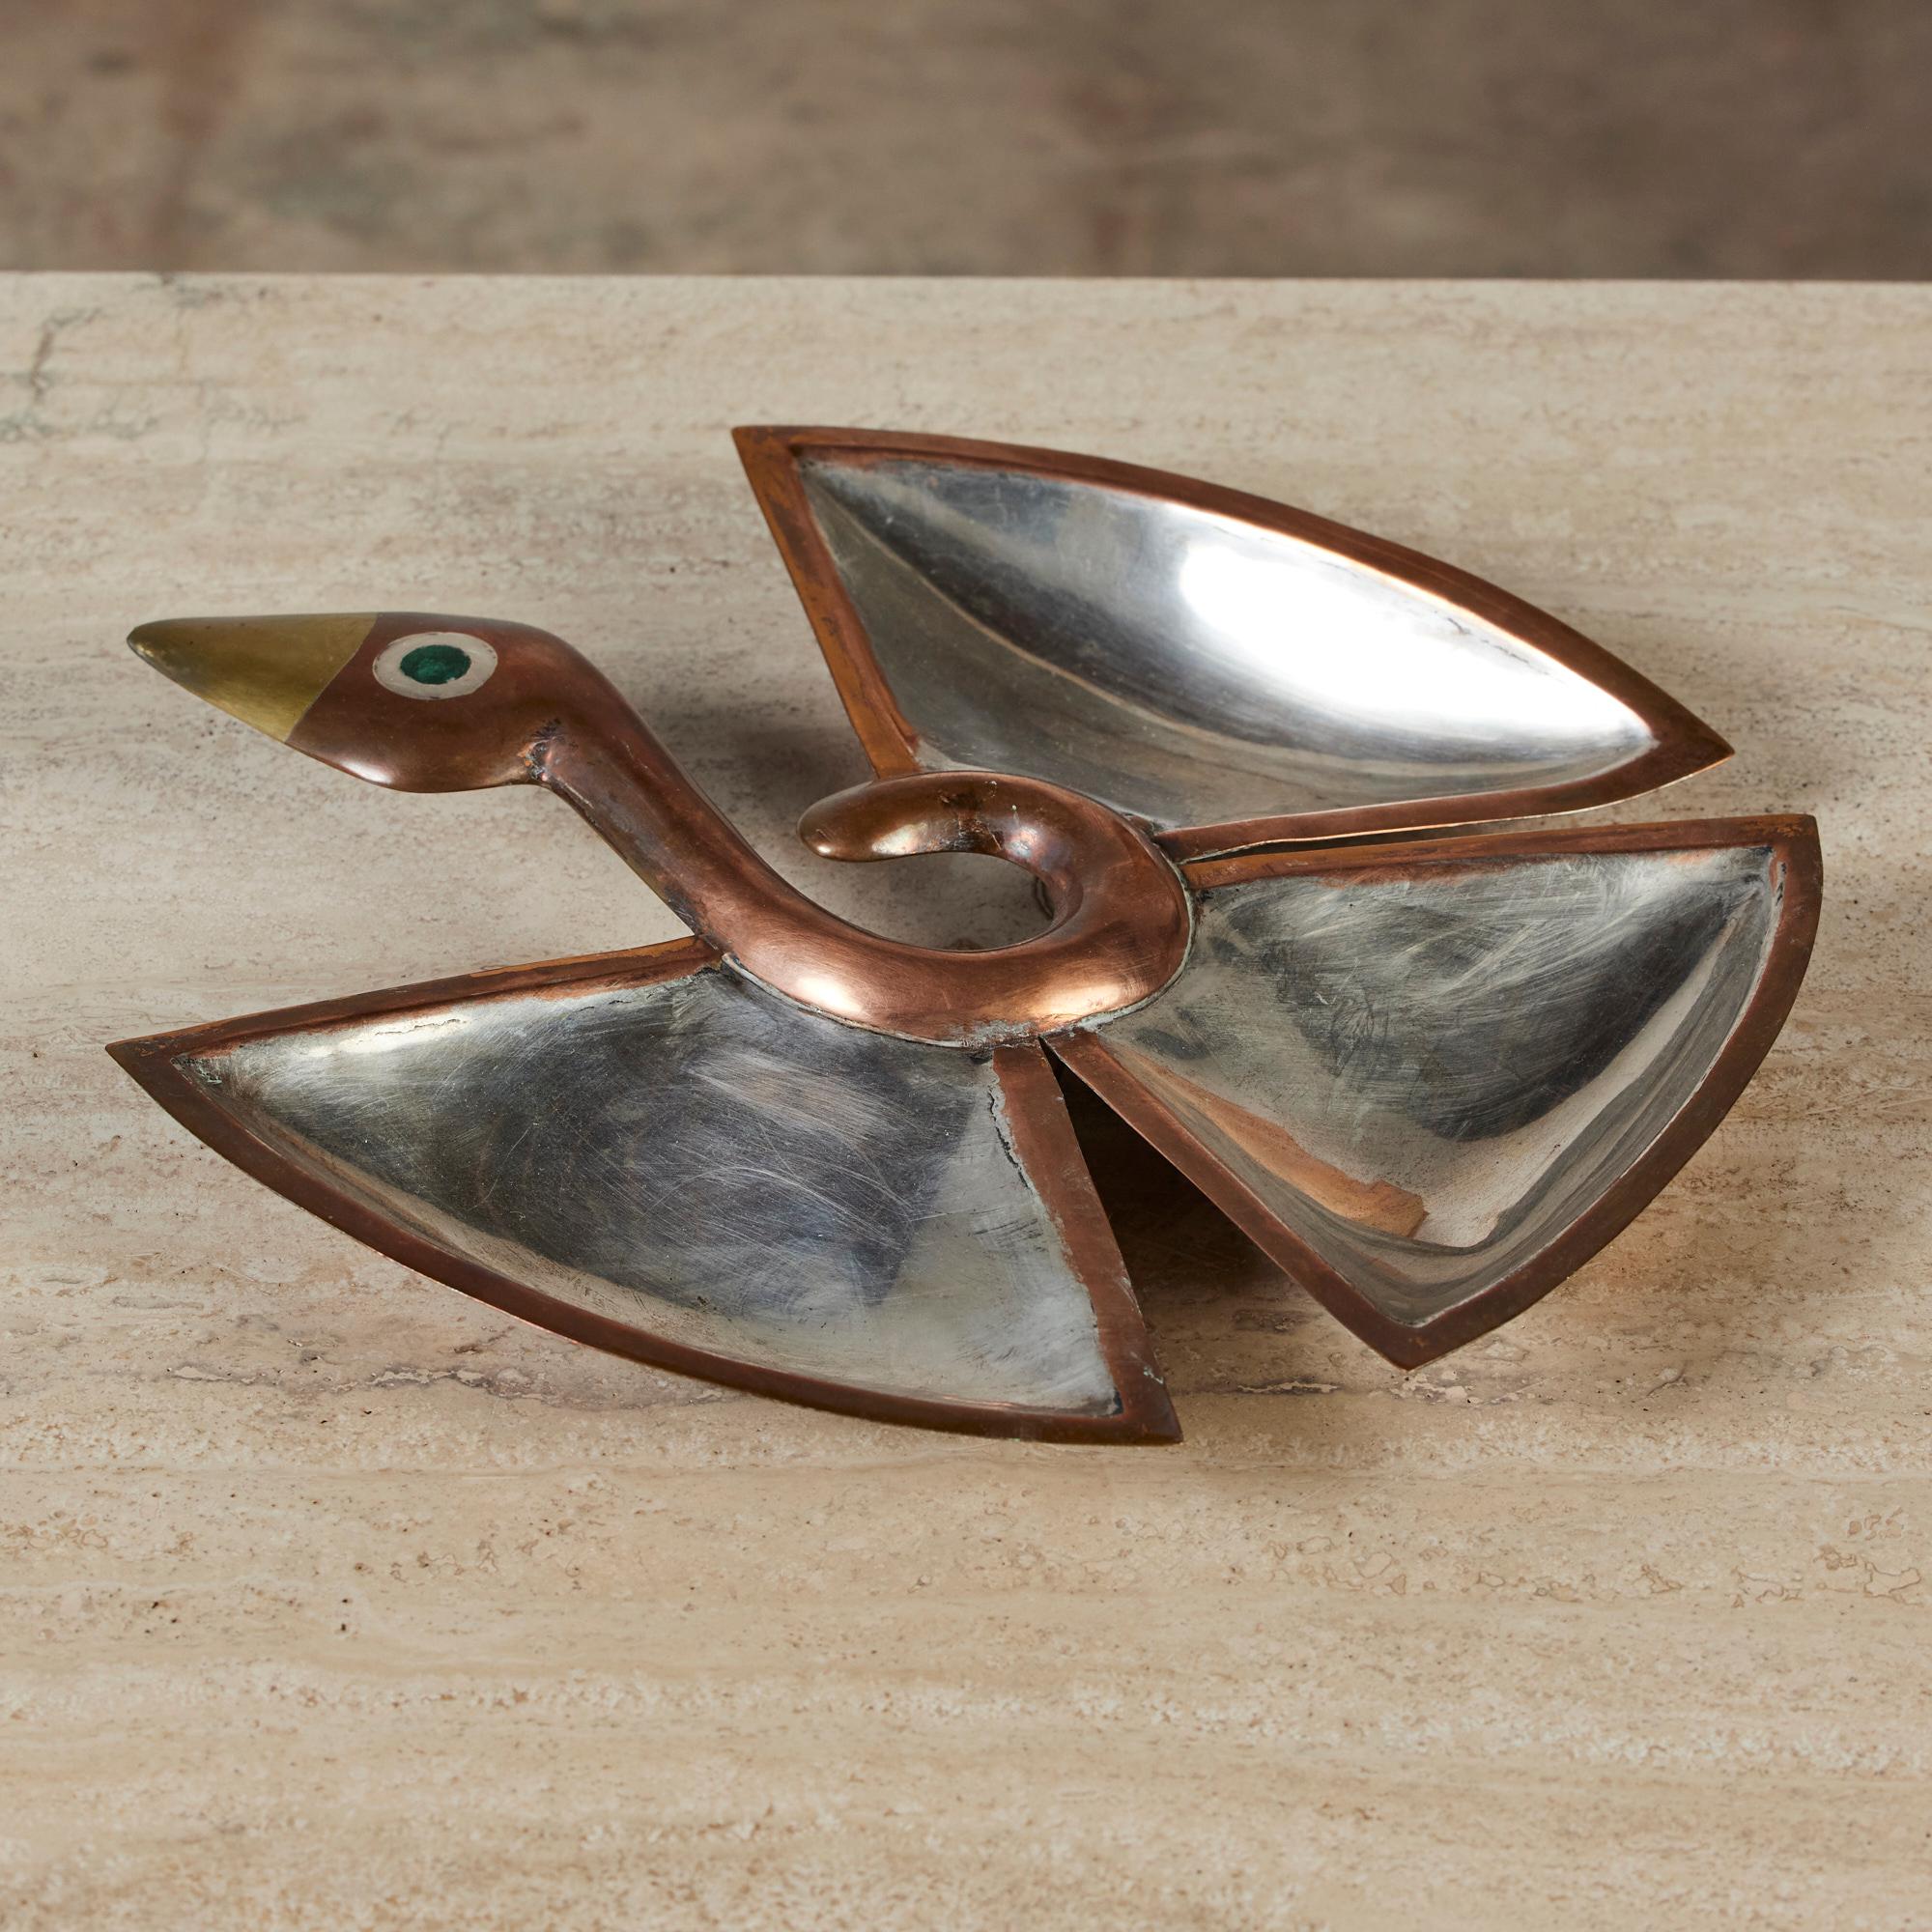 This Mexican made dish, c.1960s, is made of copper, brass and stainless steel. It's unique shape resembles a bird with sprawled wings in flight. It features three sectioned trays stemming from a copper curved neck and a dash of color, green, for the